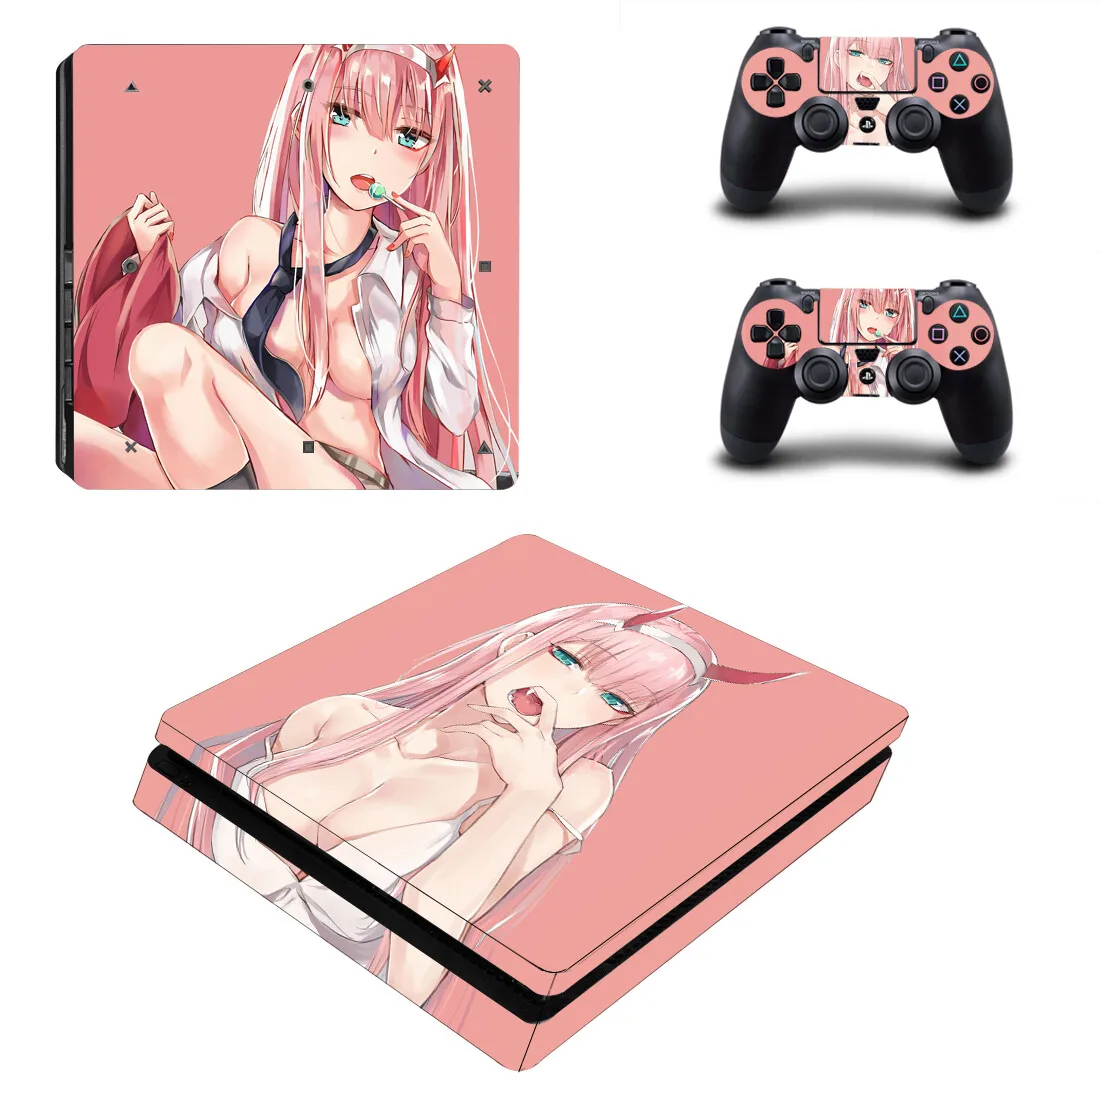 

DARLING in the FRANXX Zero Two PS4 Slim Stickers for Playstation 4 Skin Sticker Decal Cover Consol & Controller Skins Vinyl